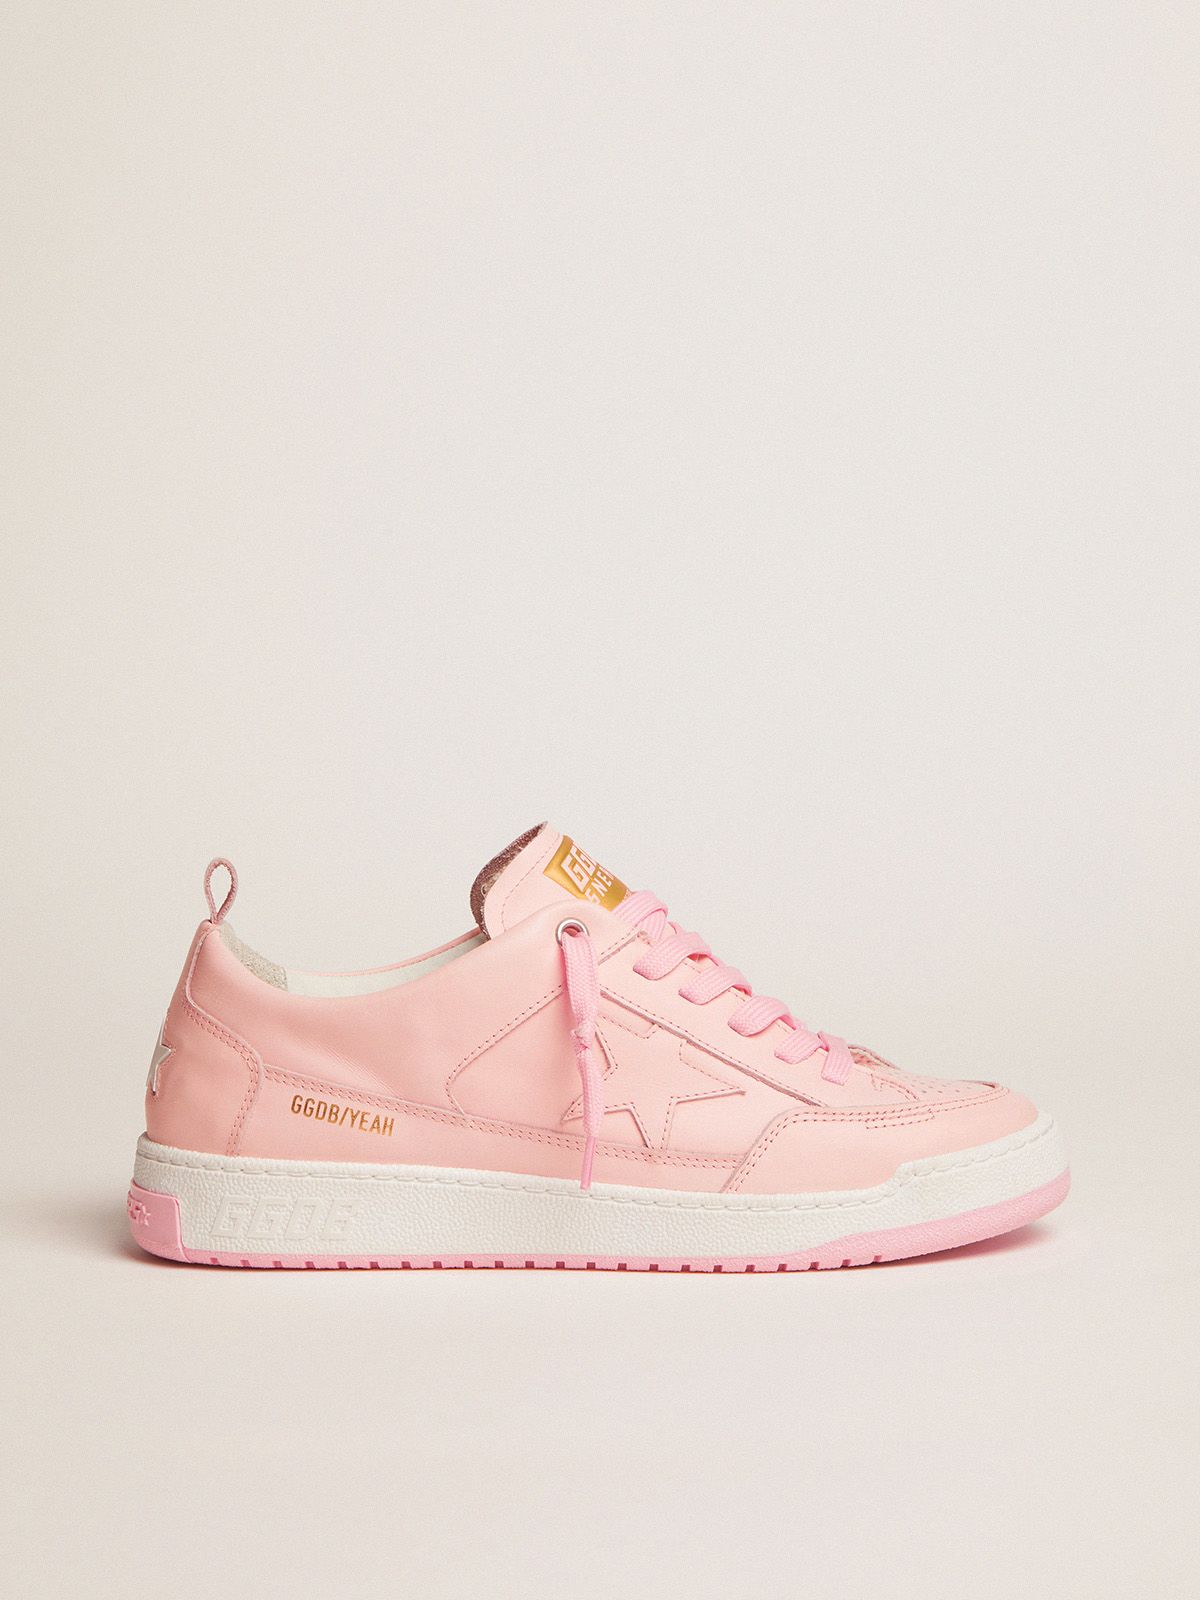 Saldi Golden Goose Uomo Yeah sneakers in pale pink leather